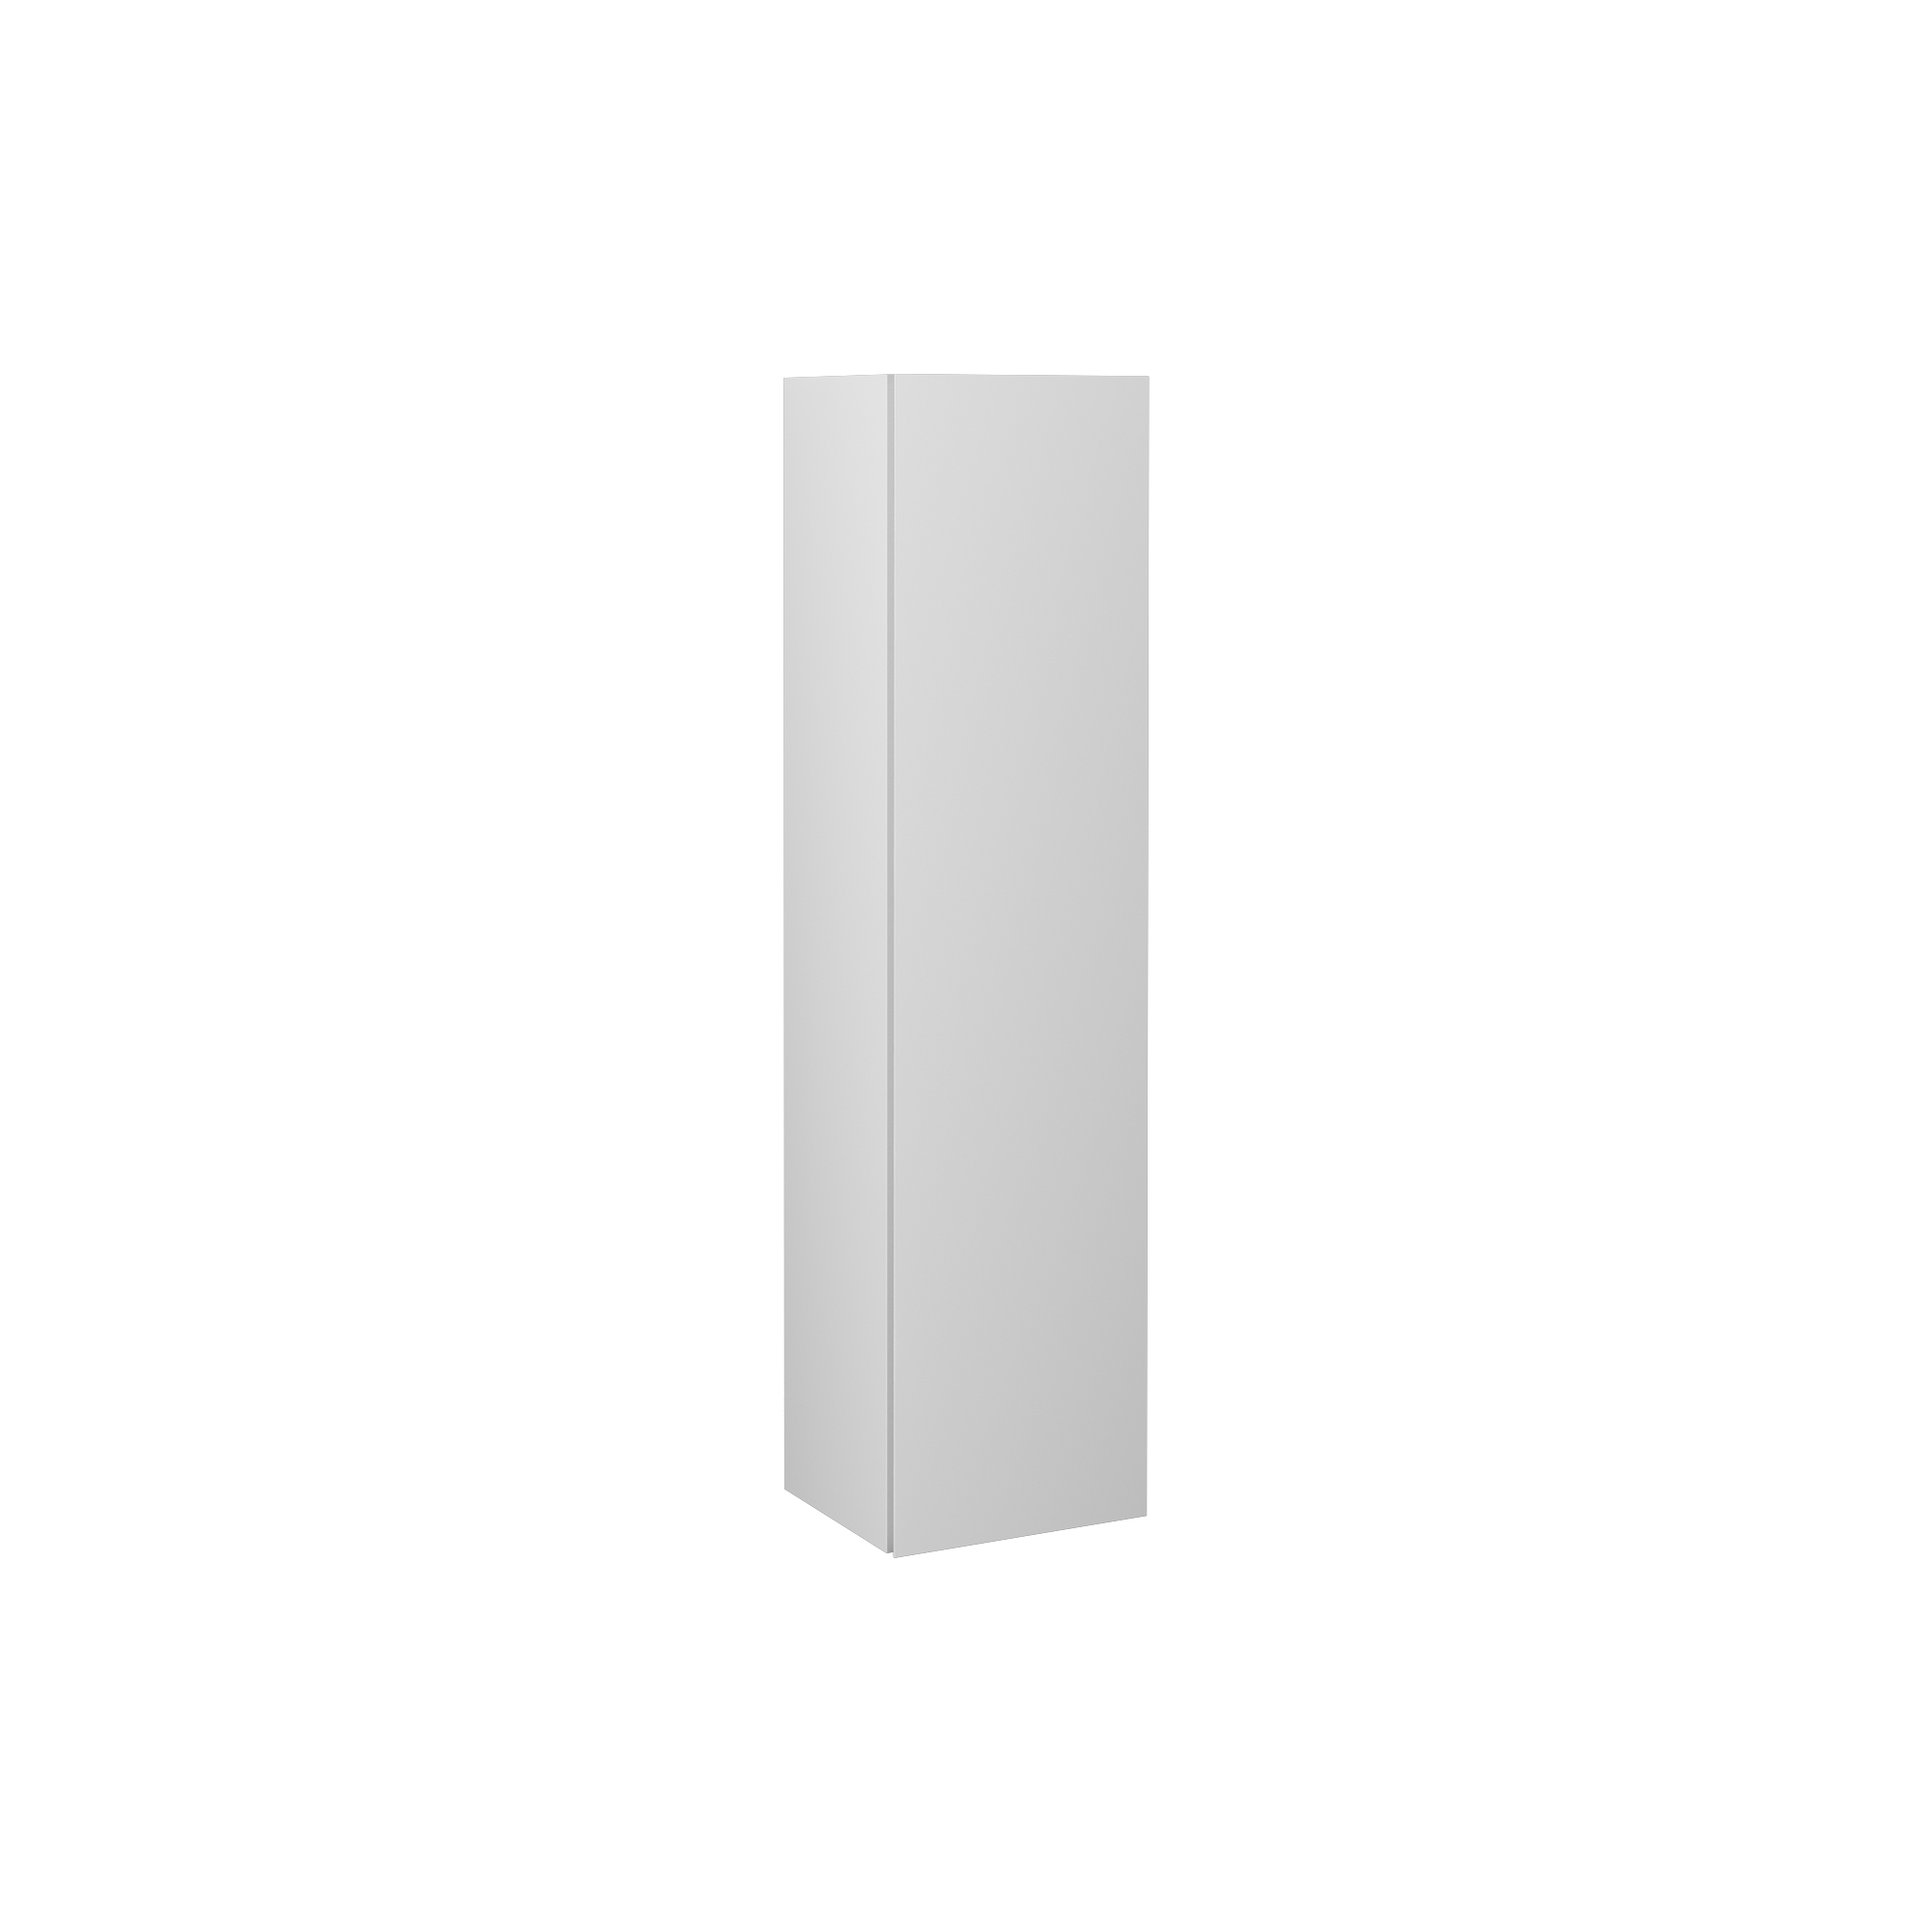 Pro 14" Tall Cabinet, White Right 